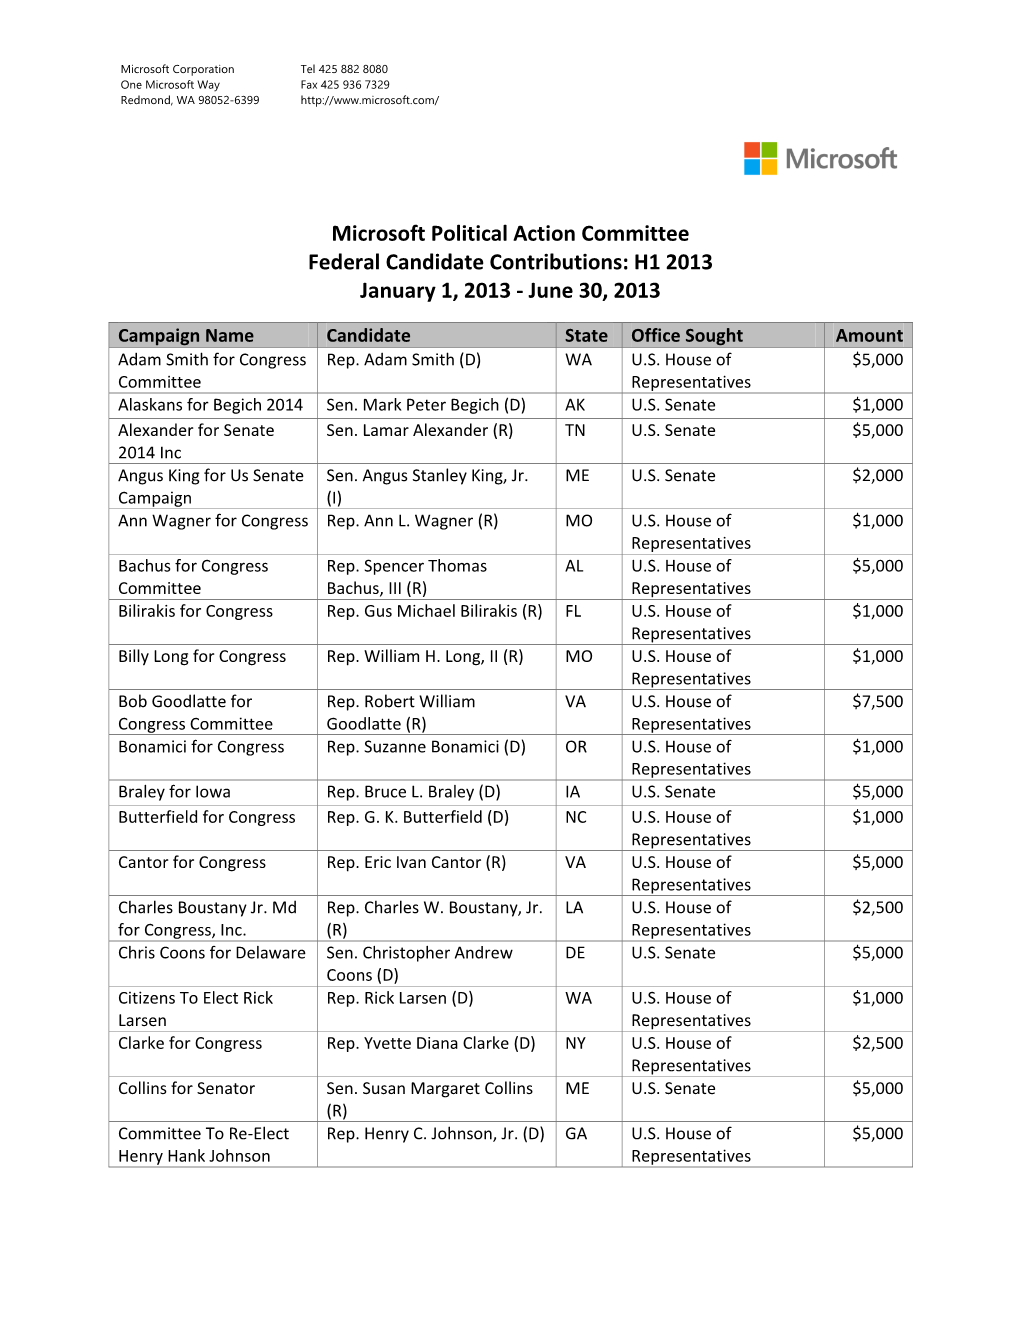 Microsoft Political Action Committee Federal Candidate Contributions: H1 2013 January 1, 2013 - June 30, 2013